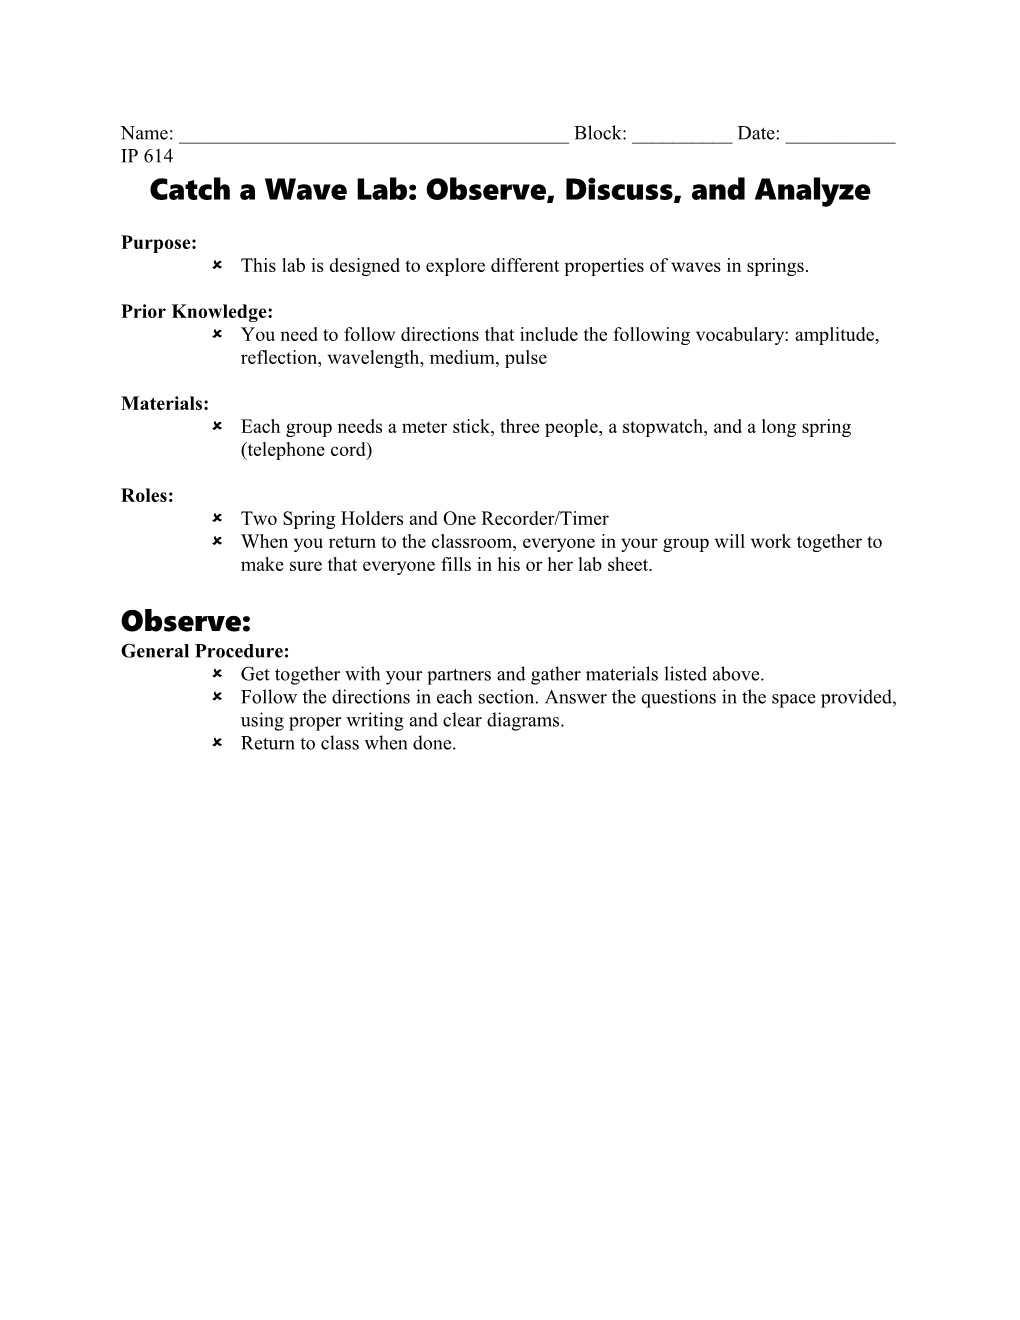 Catch a Wave Lab: Observe, Discuss, and Analyze